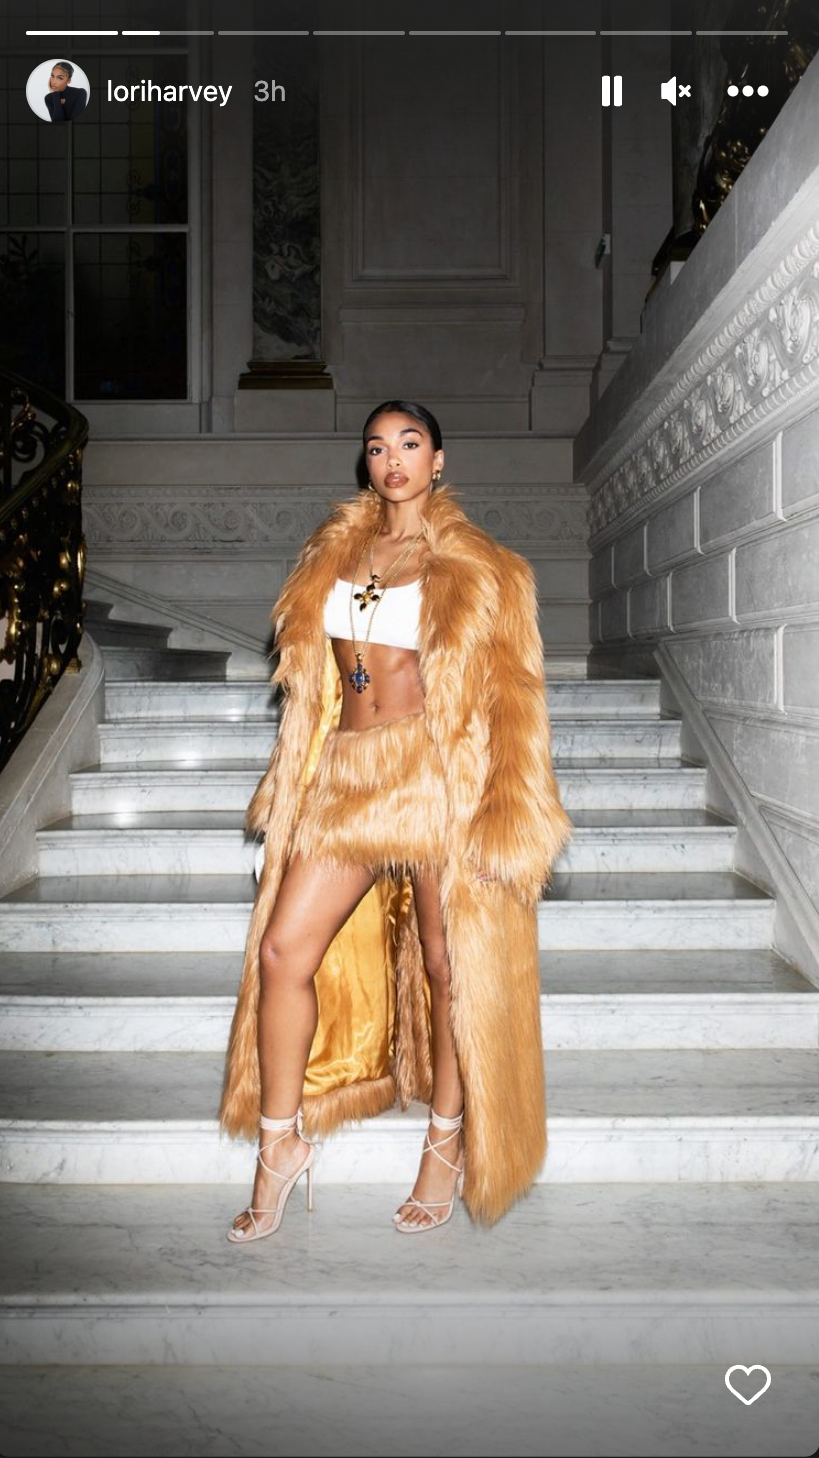 Lori Harvey's All Fur Everything Look Is Turning Heads